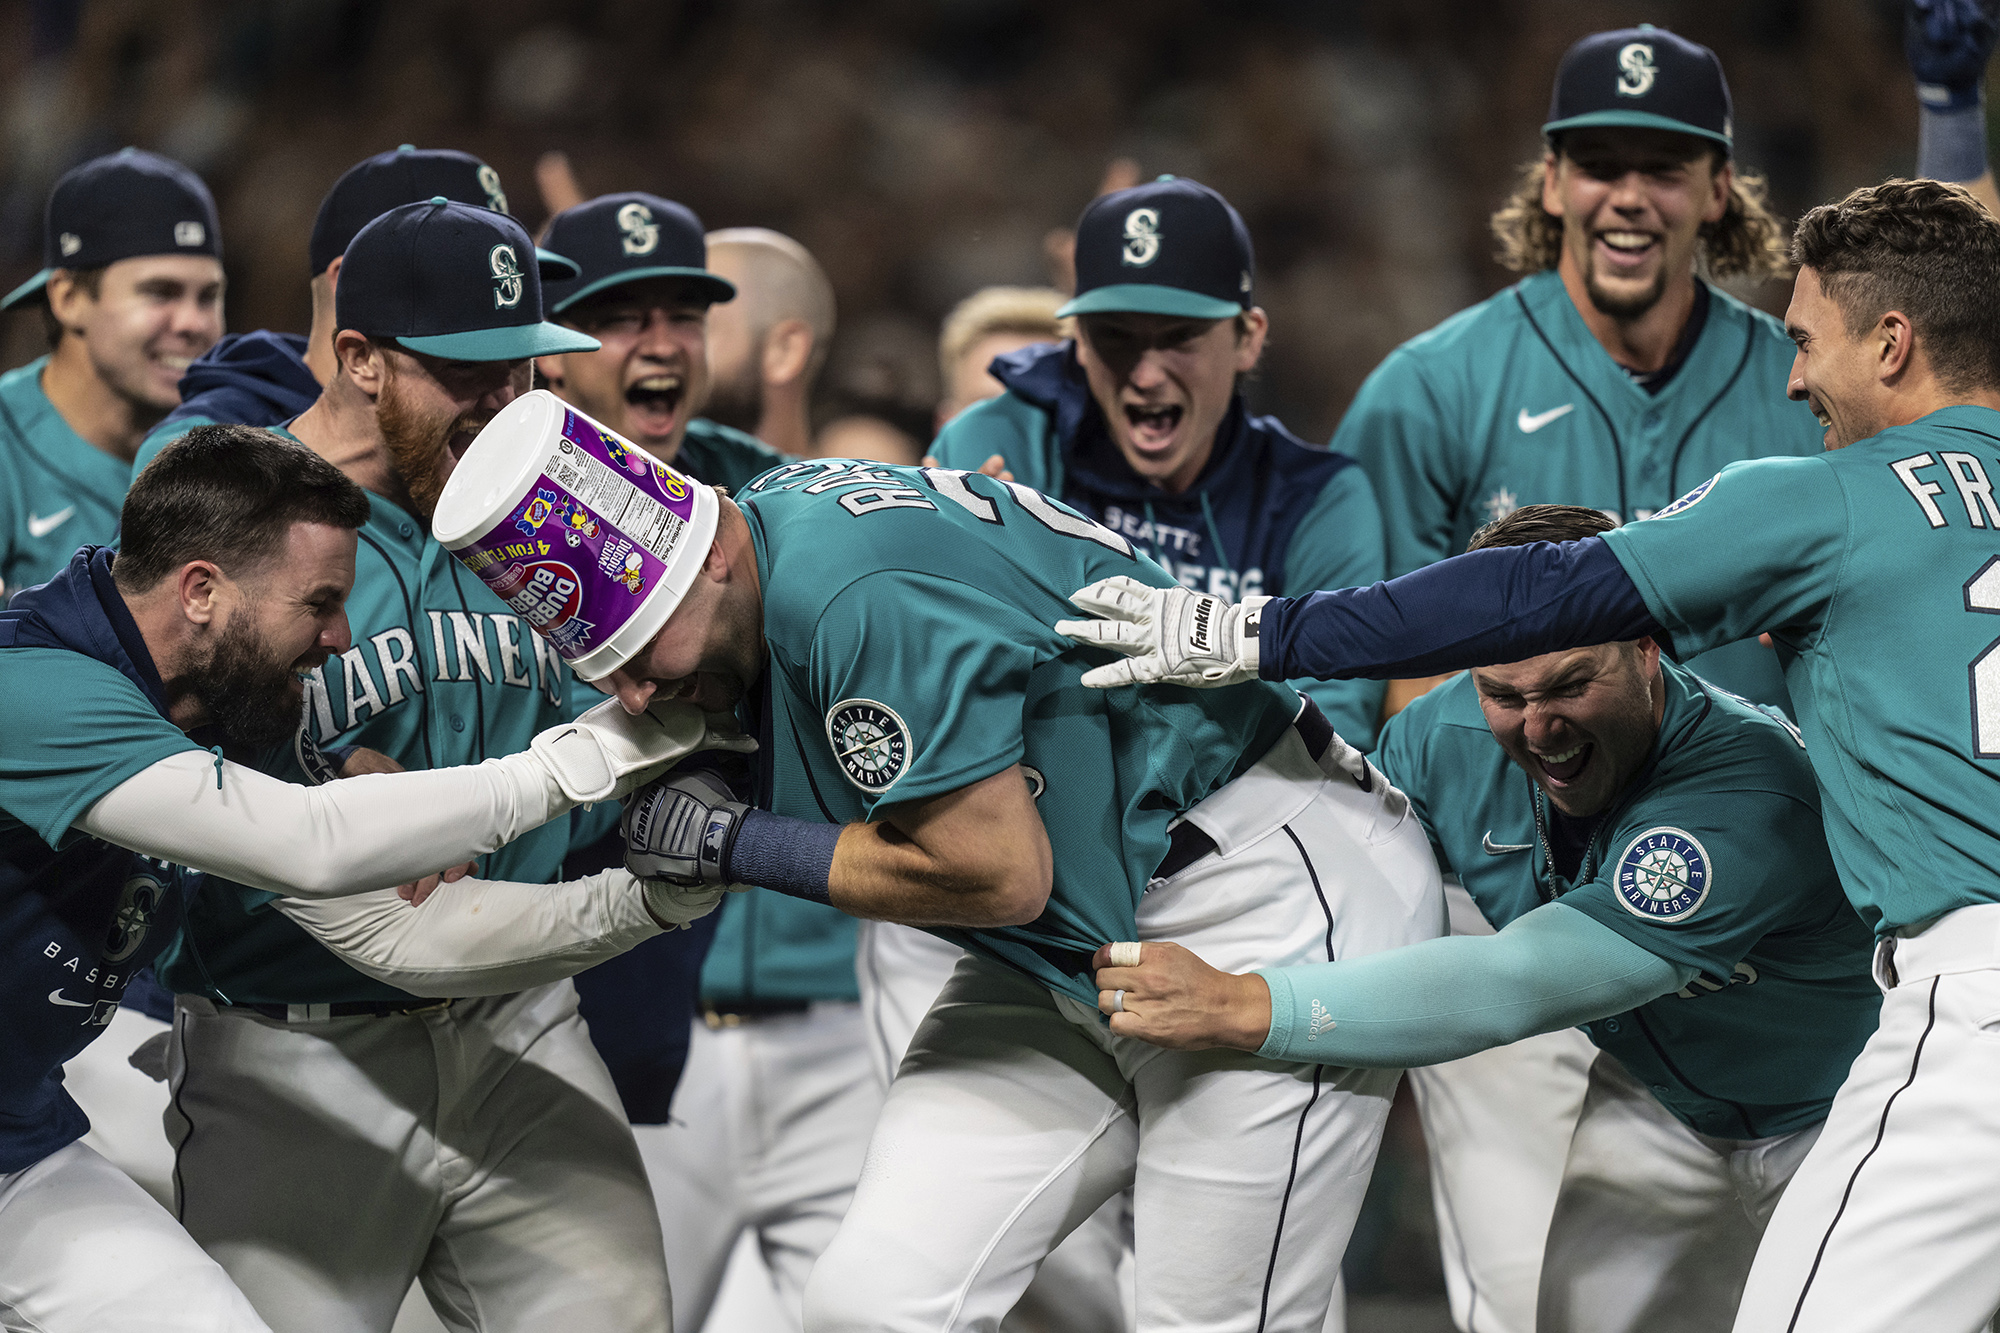 Mariners utilityman Haggerty hurt, out for start of playoffs